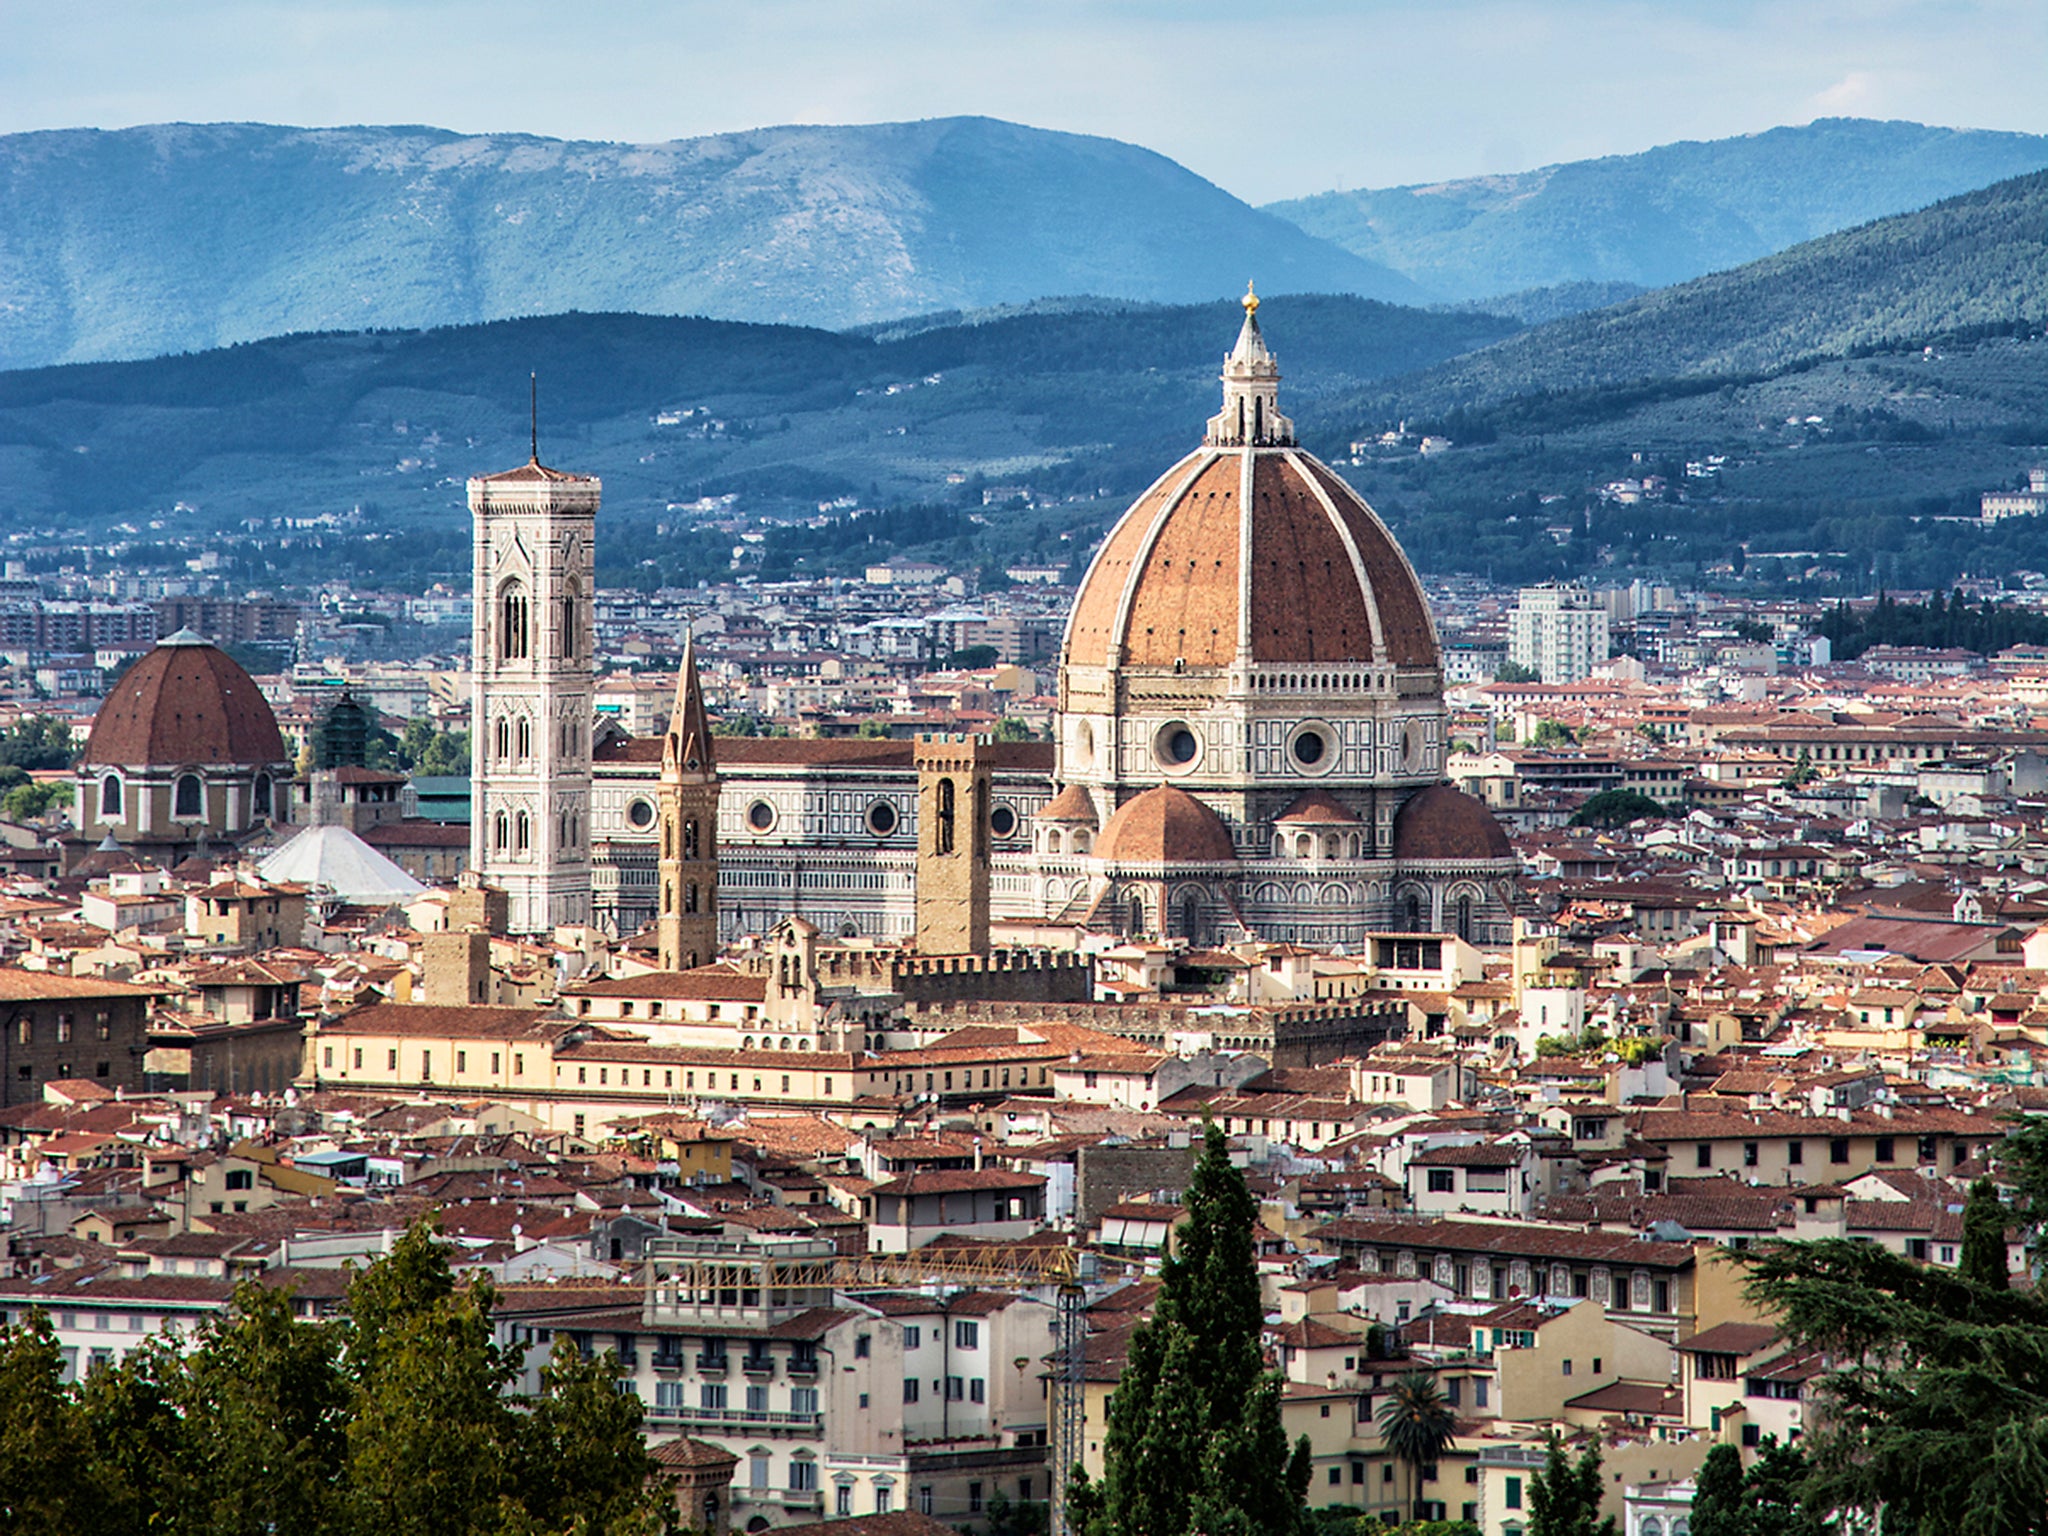 Florence authorities want to protect the area around the city's ancient cathedral from fast food restaurants